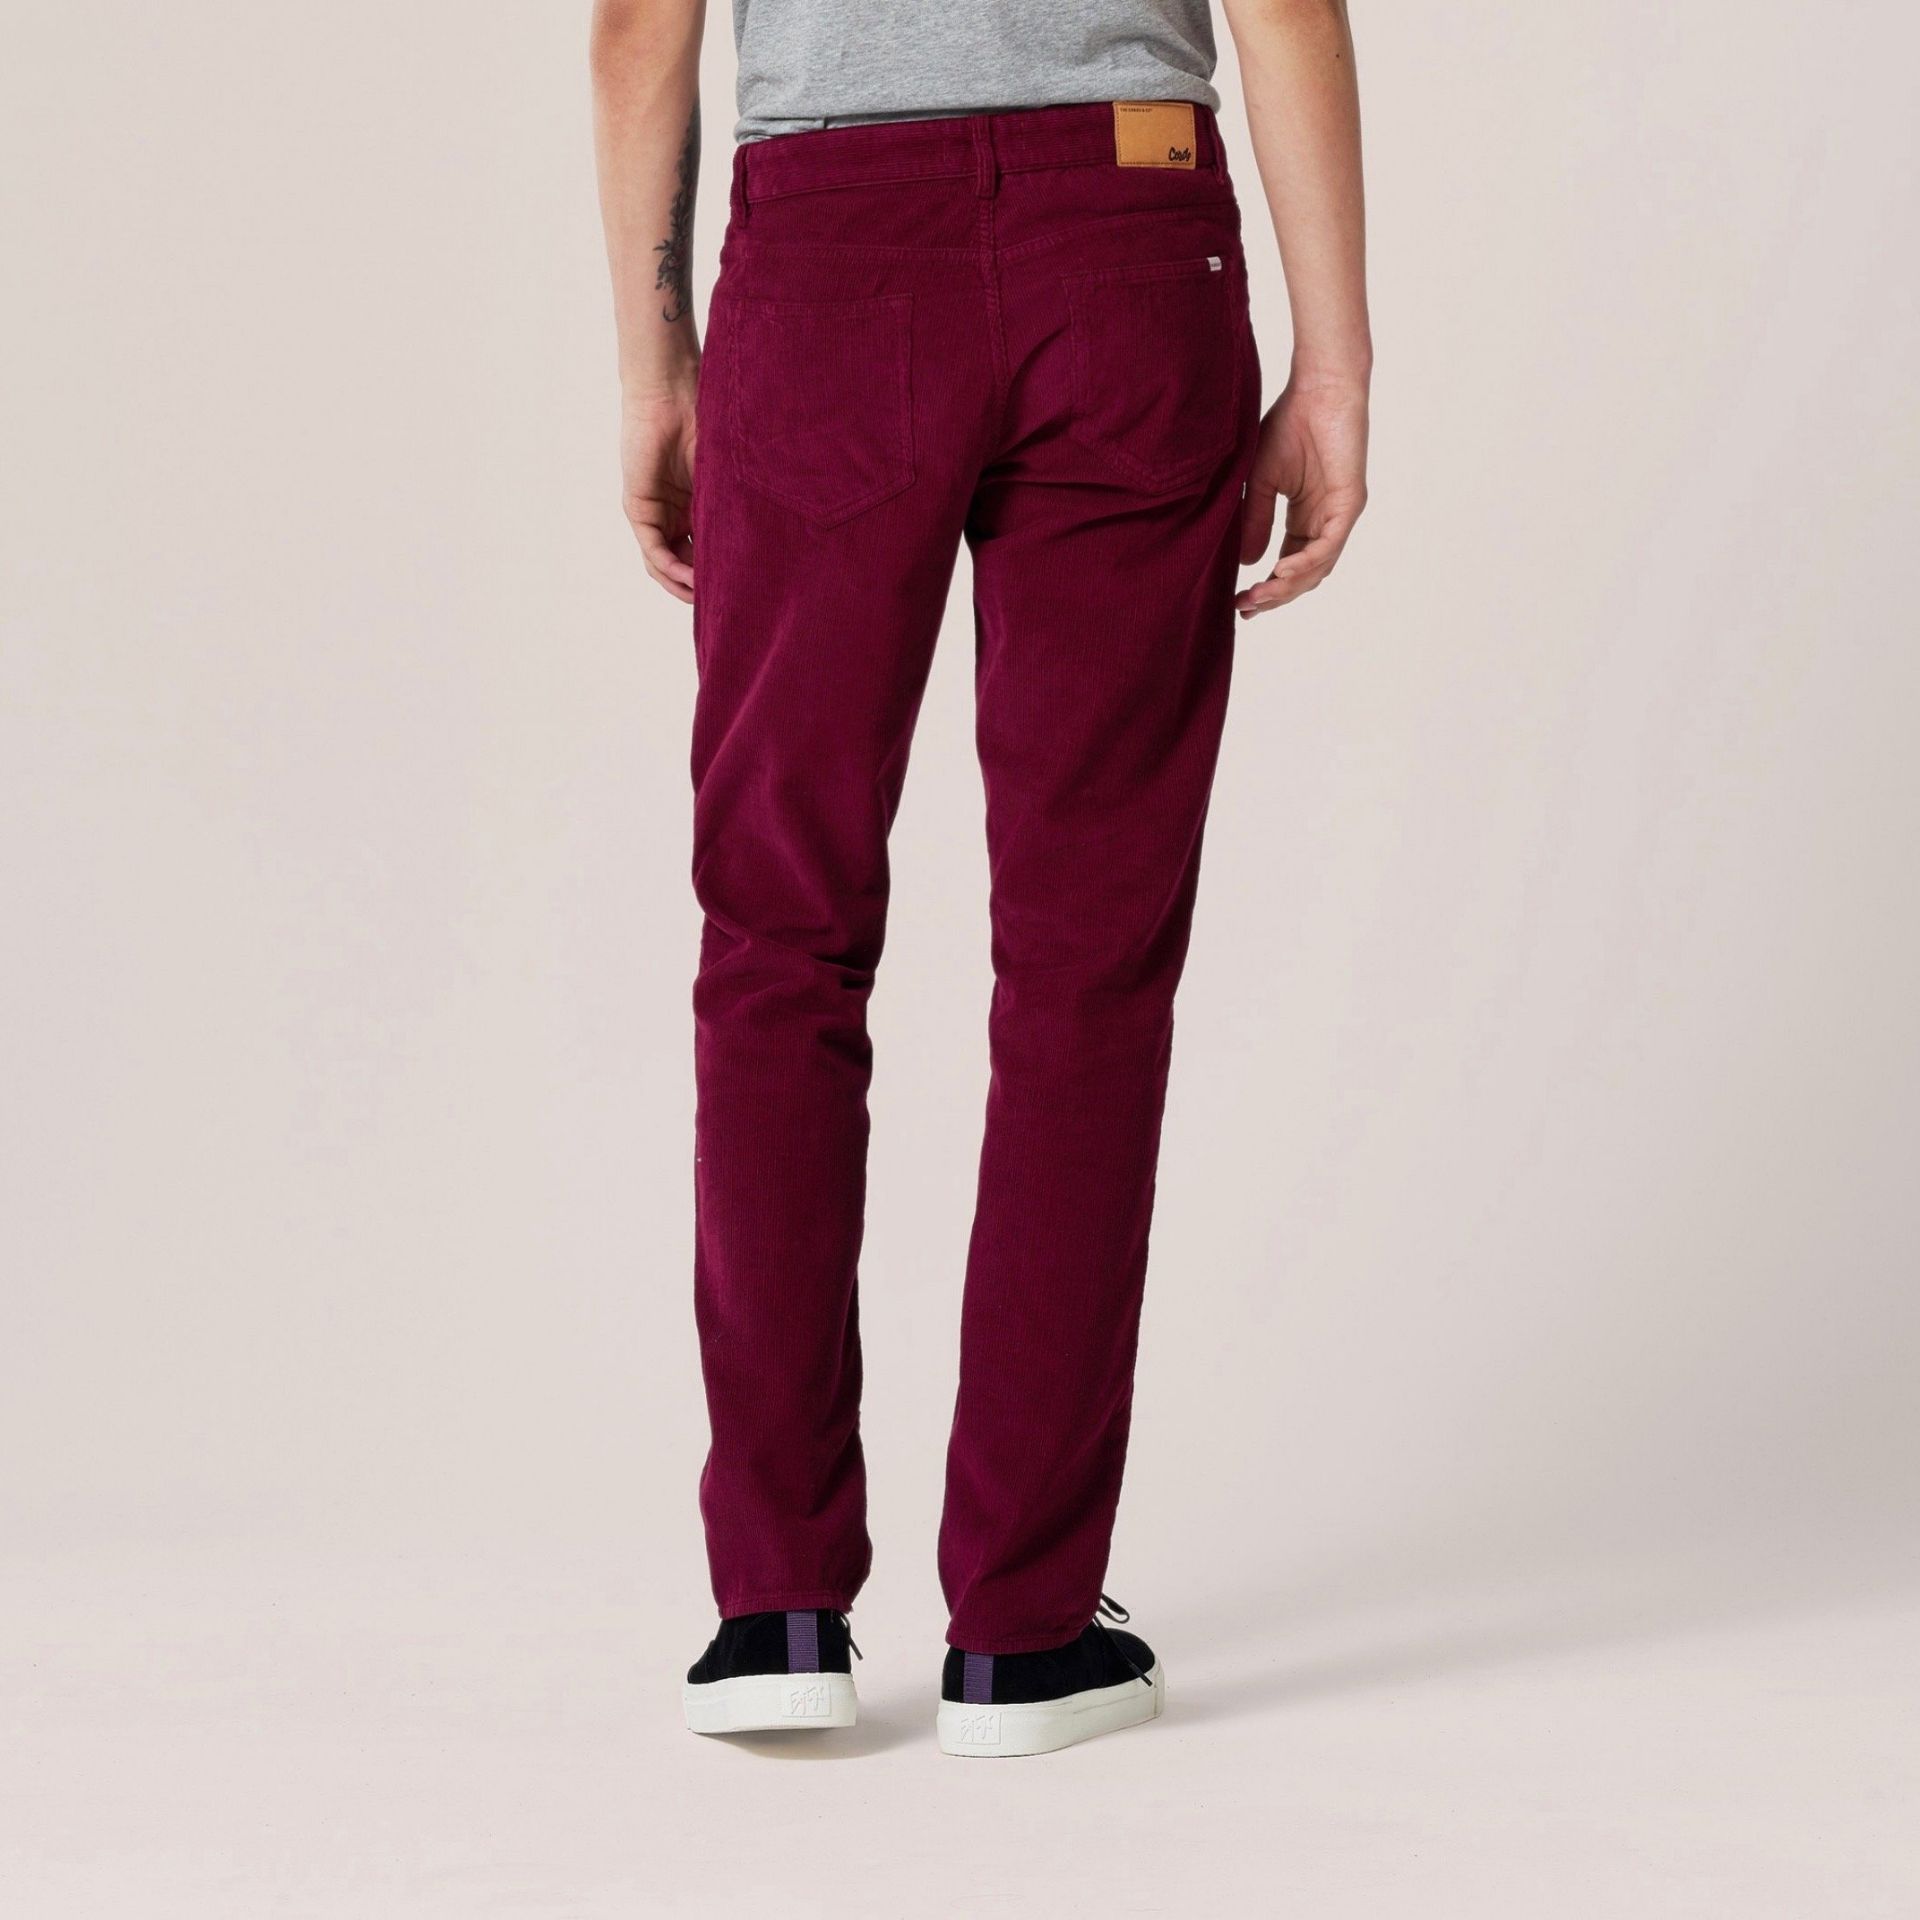 The Cords & Co. "Wes" Men's/High-Waist/ Straight Fit/ Narrow Bottom MSRP $160